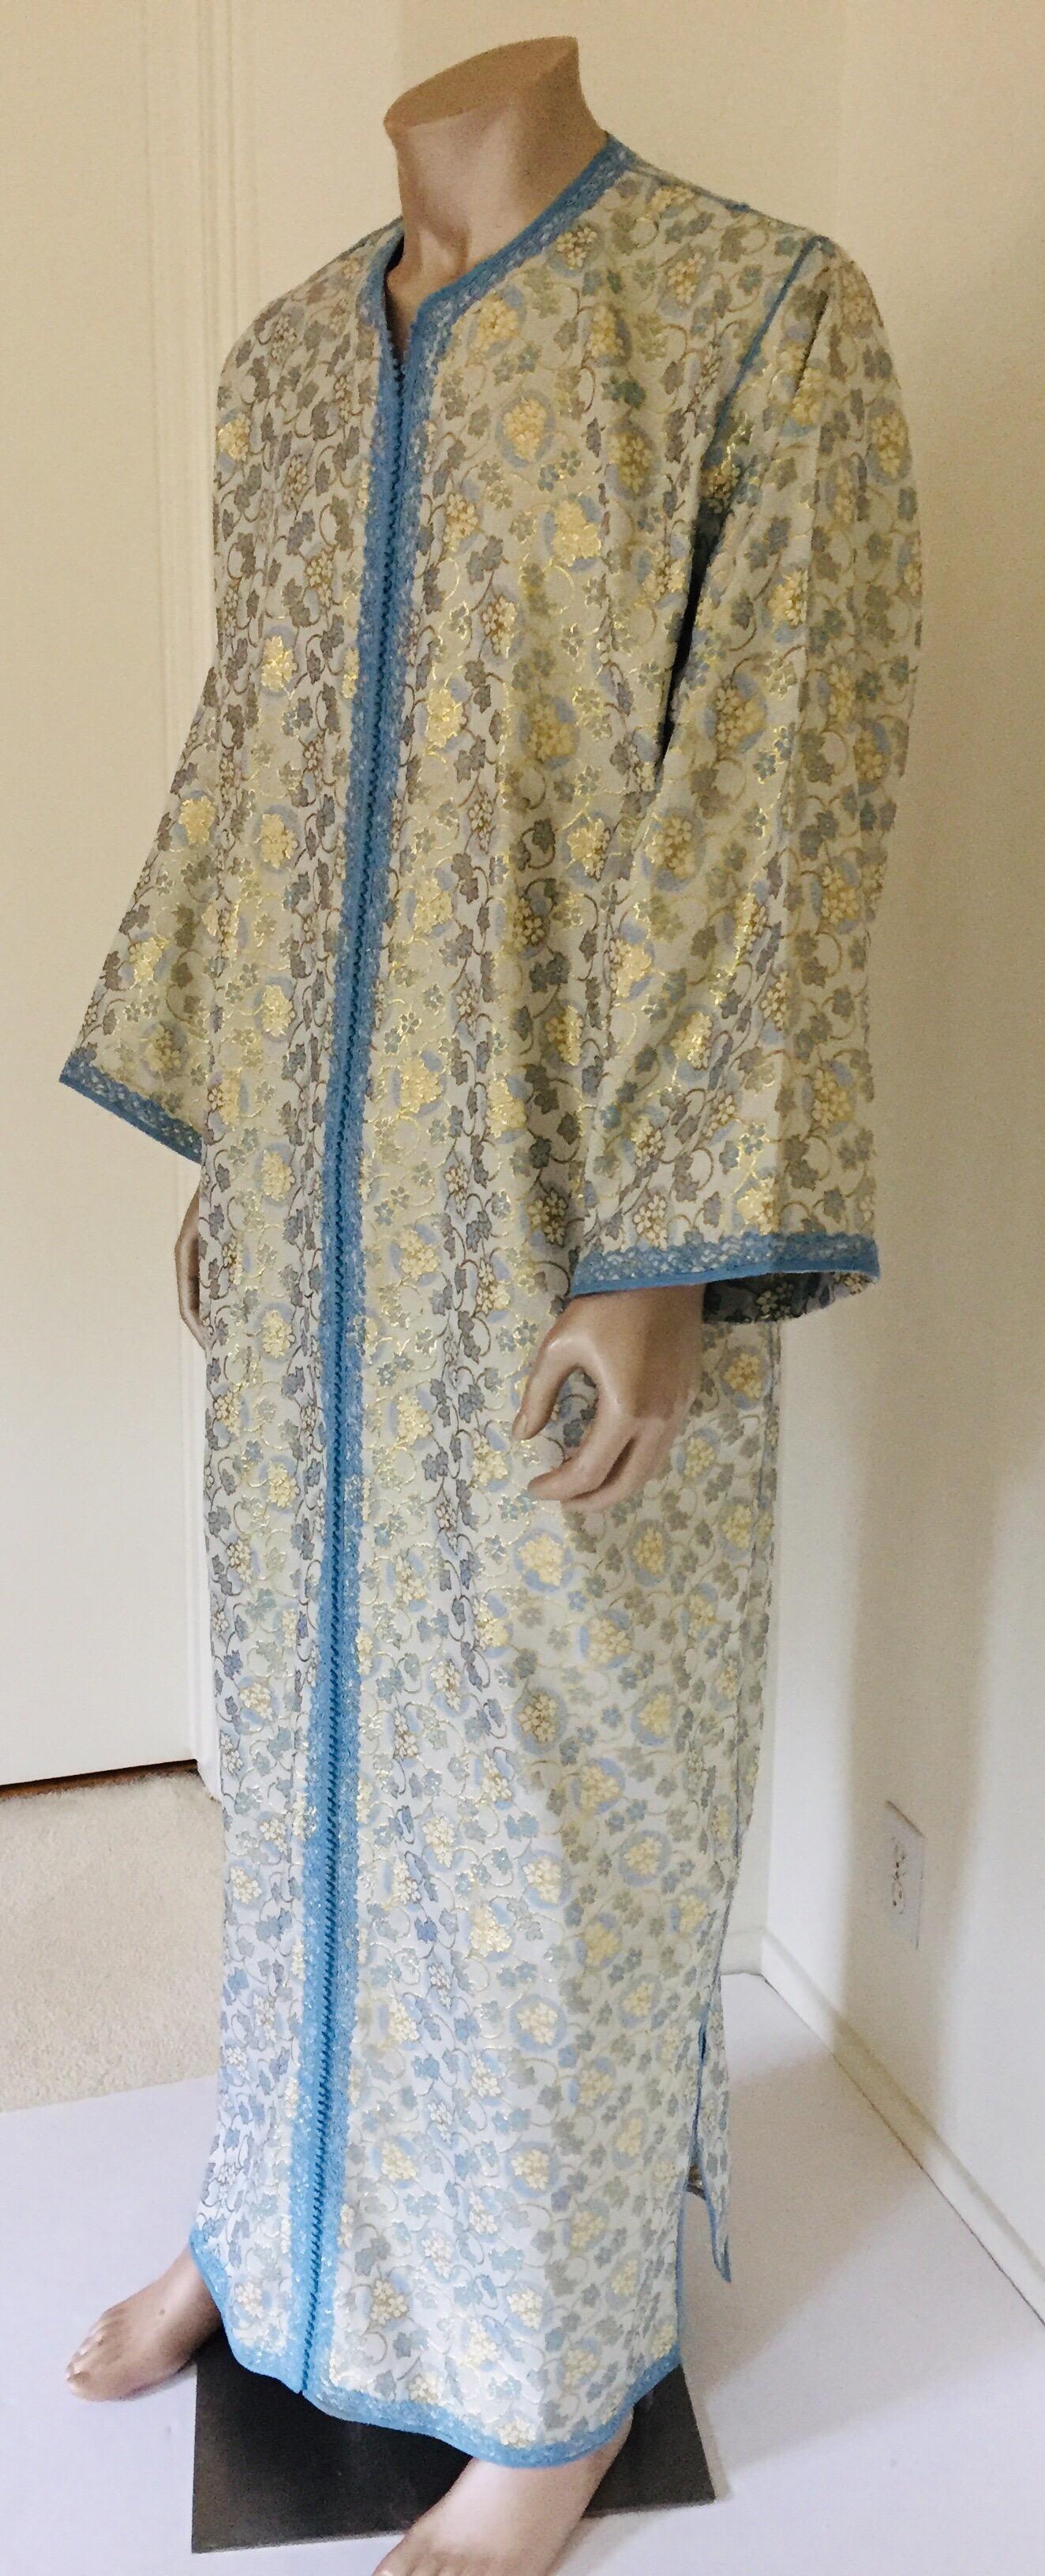 Metallic blue and silver brocade dress kaftan with silver and blue trim.
Handmade long maxi dress caftan from North Africa, Morocco.
Vintage exotic 1970s silver metallic brocade caftan robe.
The luminous metallic silver and gold maxi dress caftan